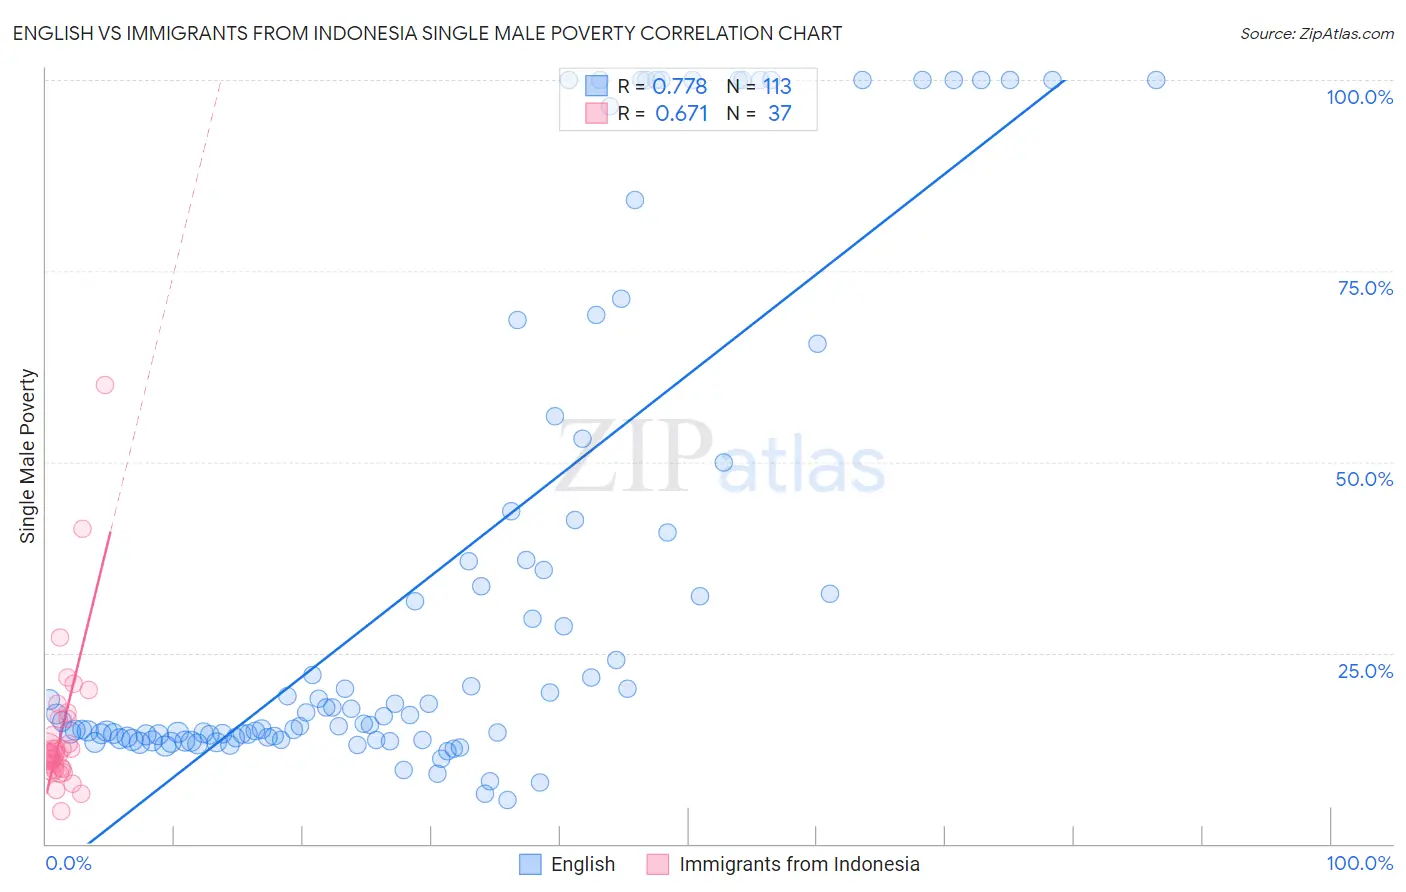 English vs Immigrants from Indonesia Single Male Poverty